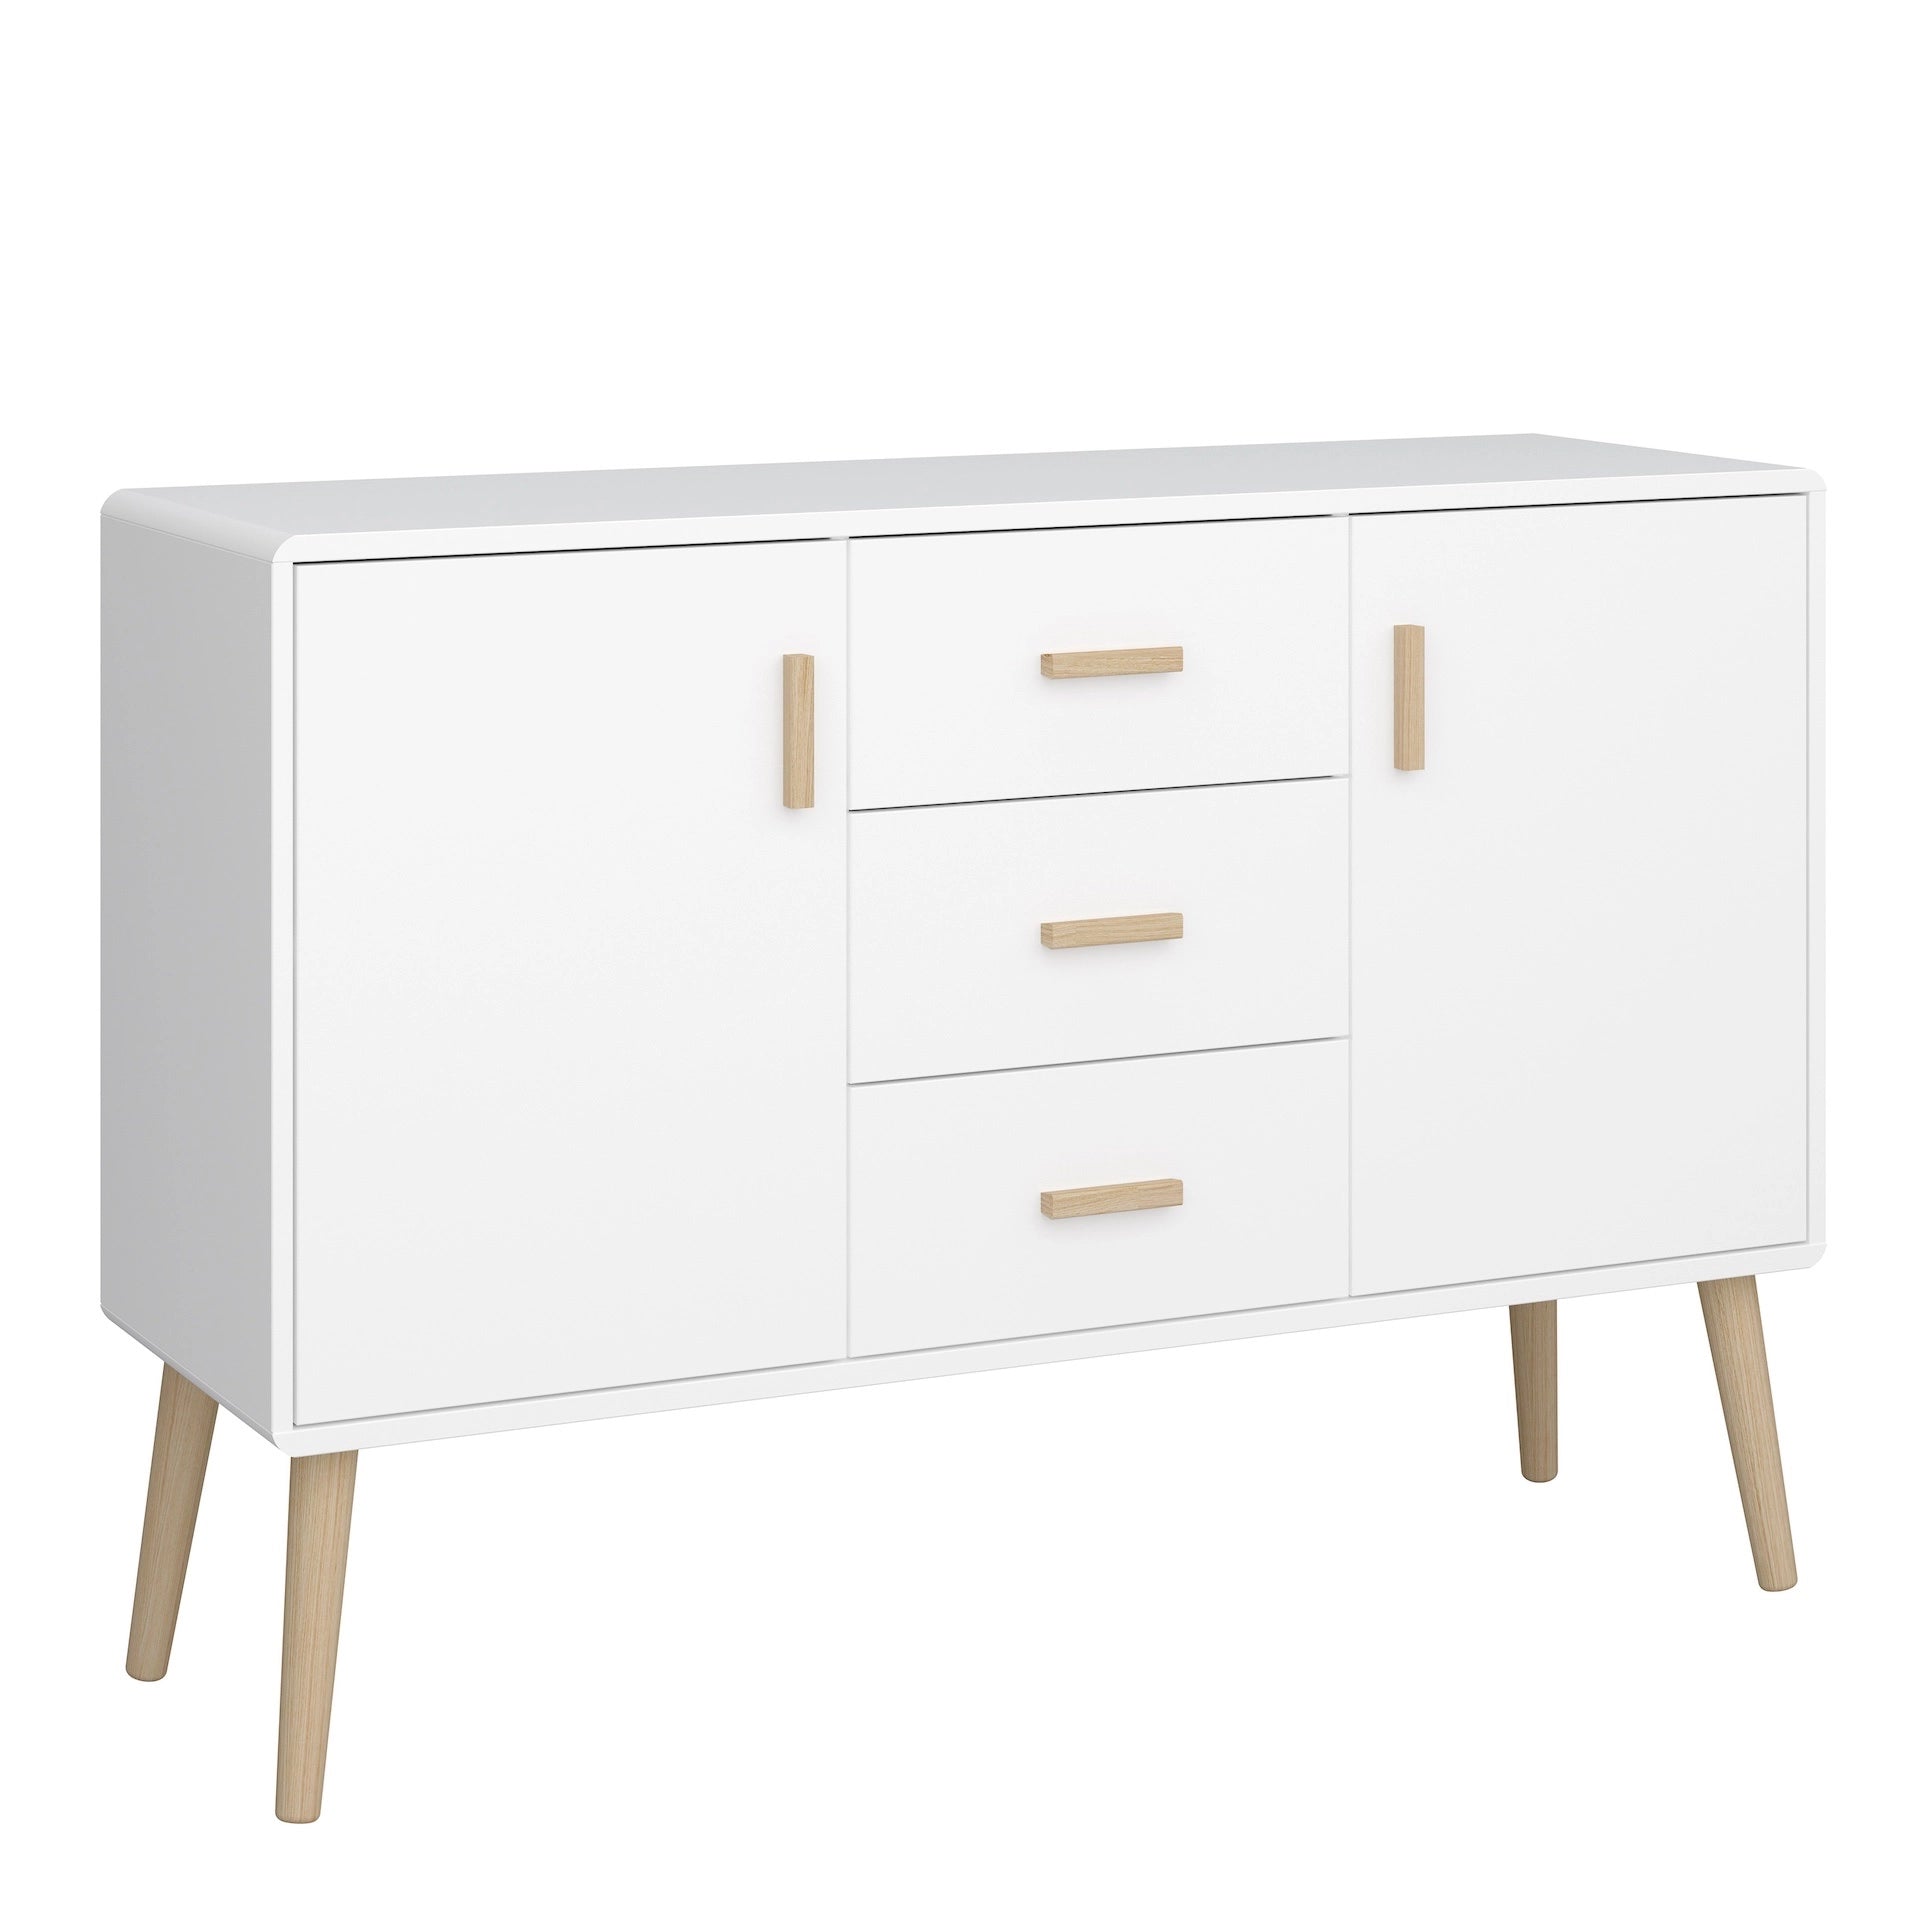 Furniture To Go Pavona Sideboard 2 Doors + 3 Drawers, Pure White